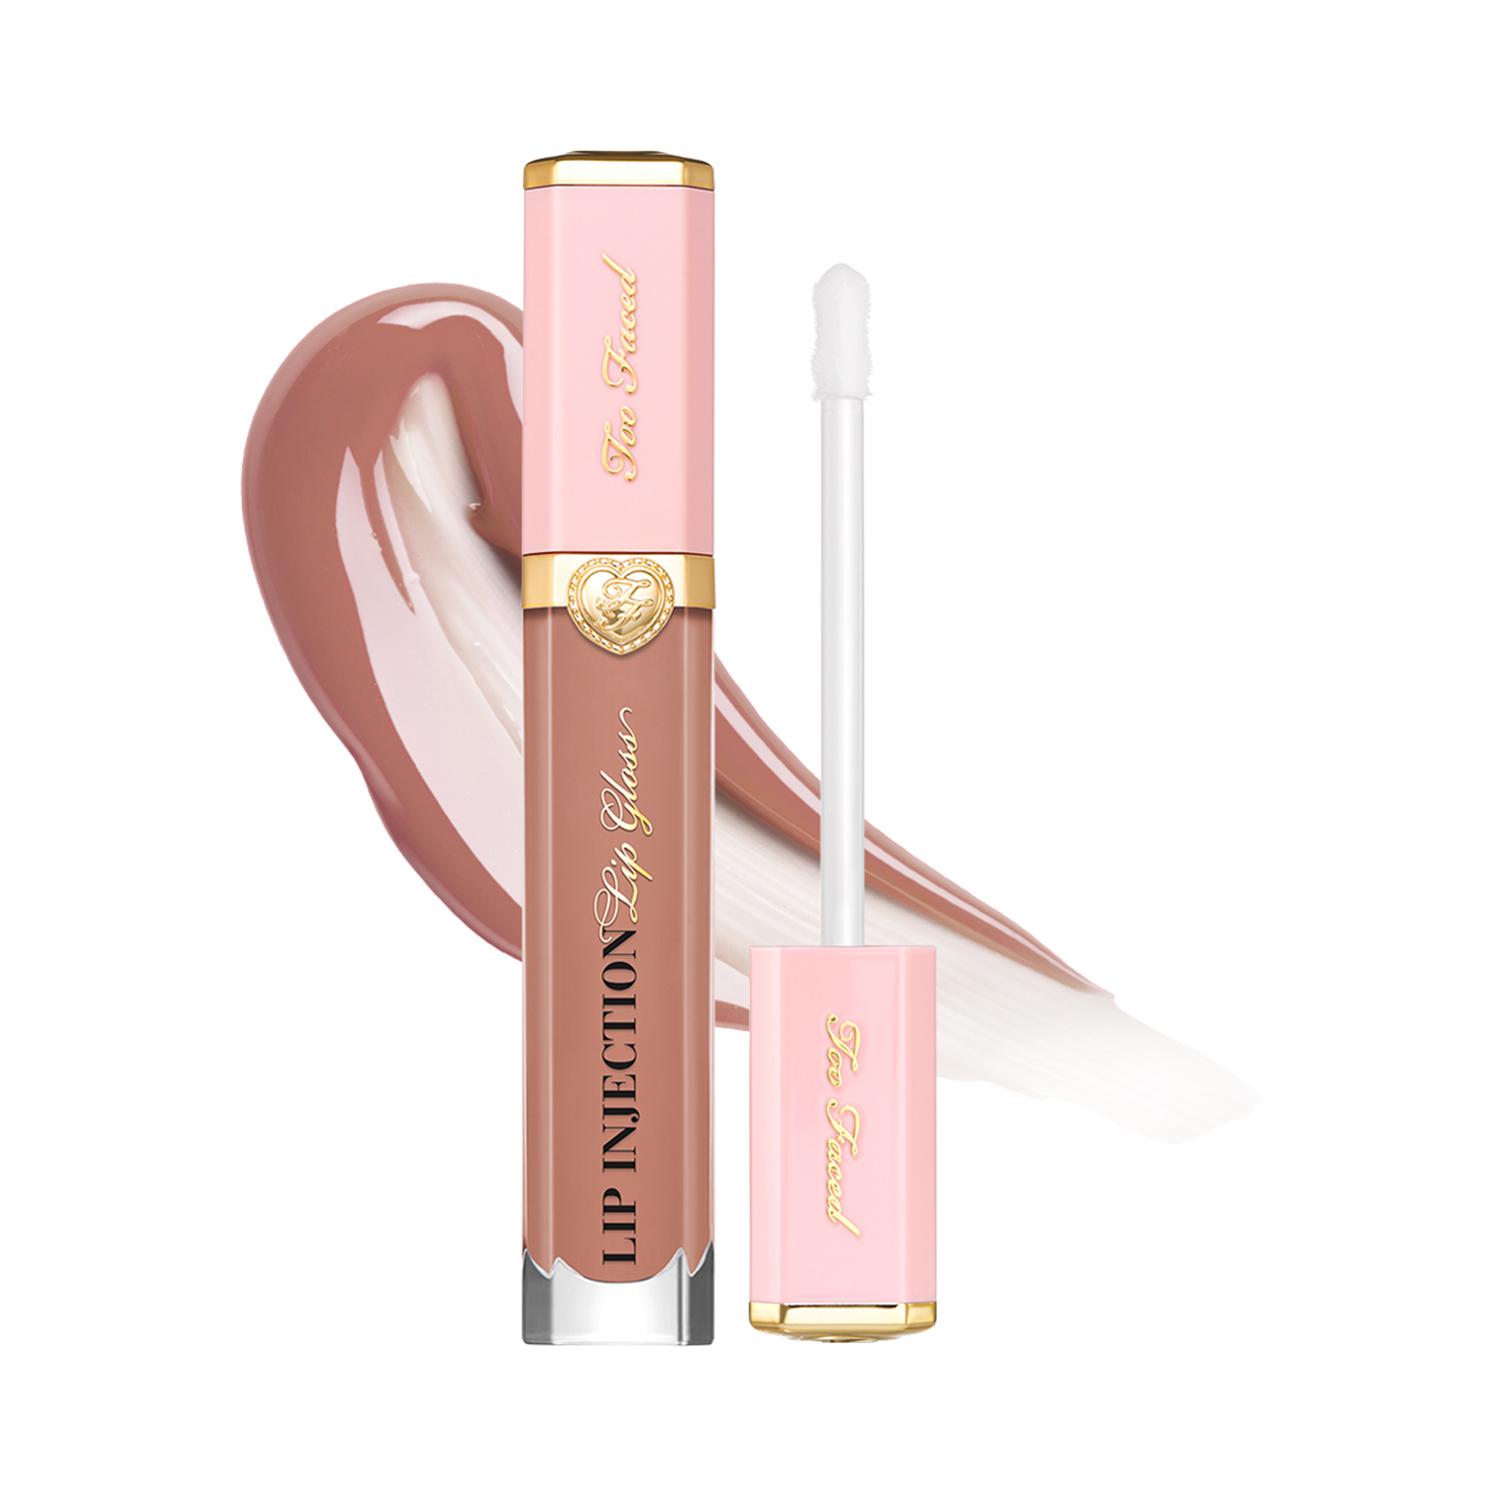 Too Faced | Too Faced Lip Injection Power Plumping Lip Gloss - Soulmate (7ml)